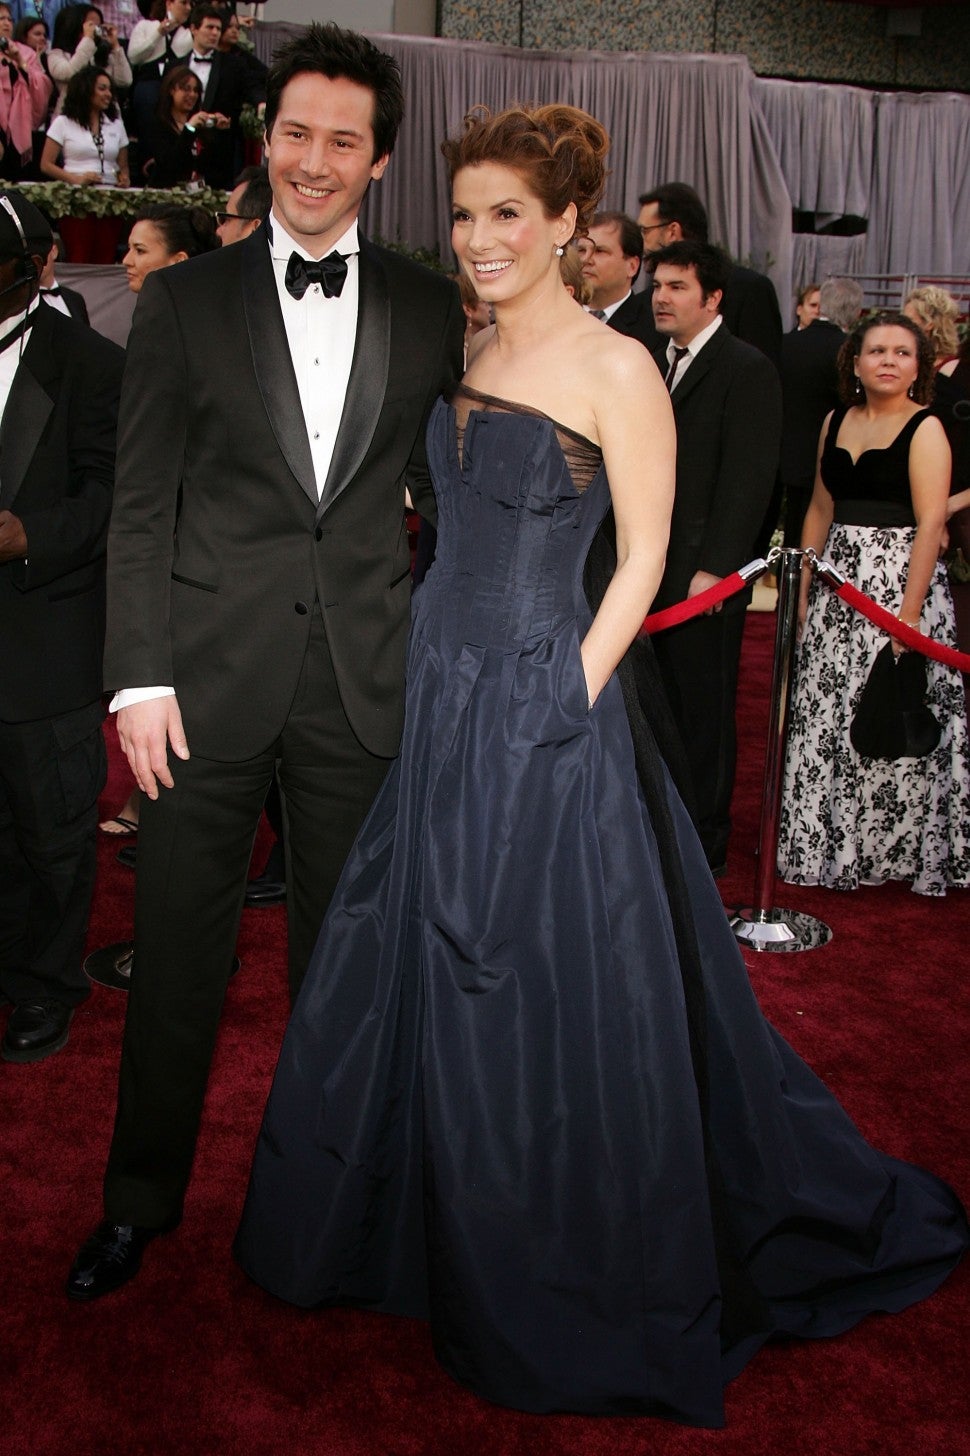 Sandra Bullock and Keanu Reeves arrive to the 78th Annual Academy Awards at the Kodak Theatre on March 5, 2006 in Hollywood, California.